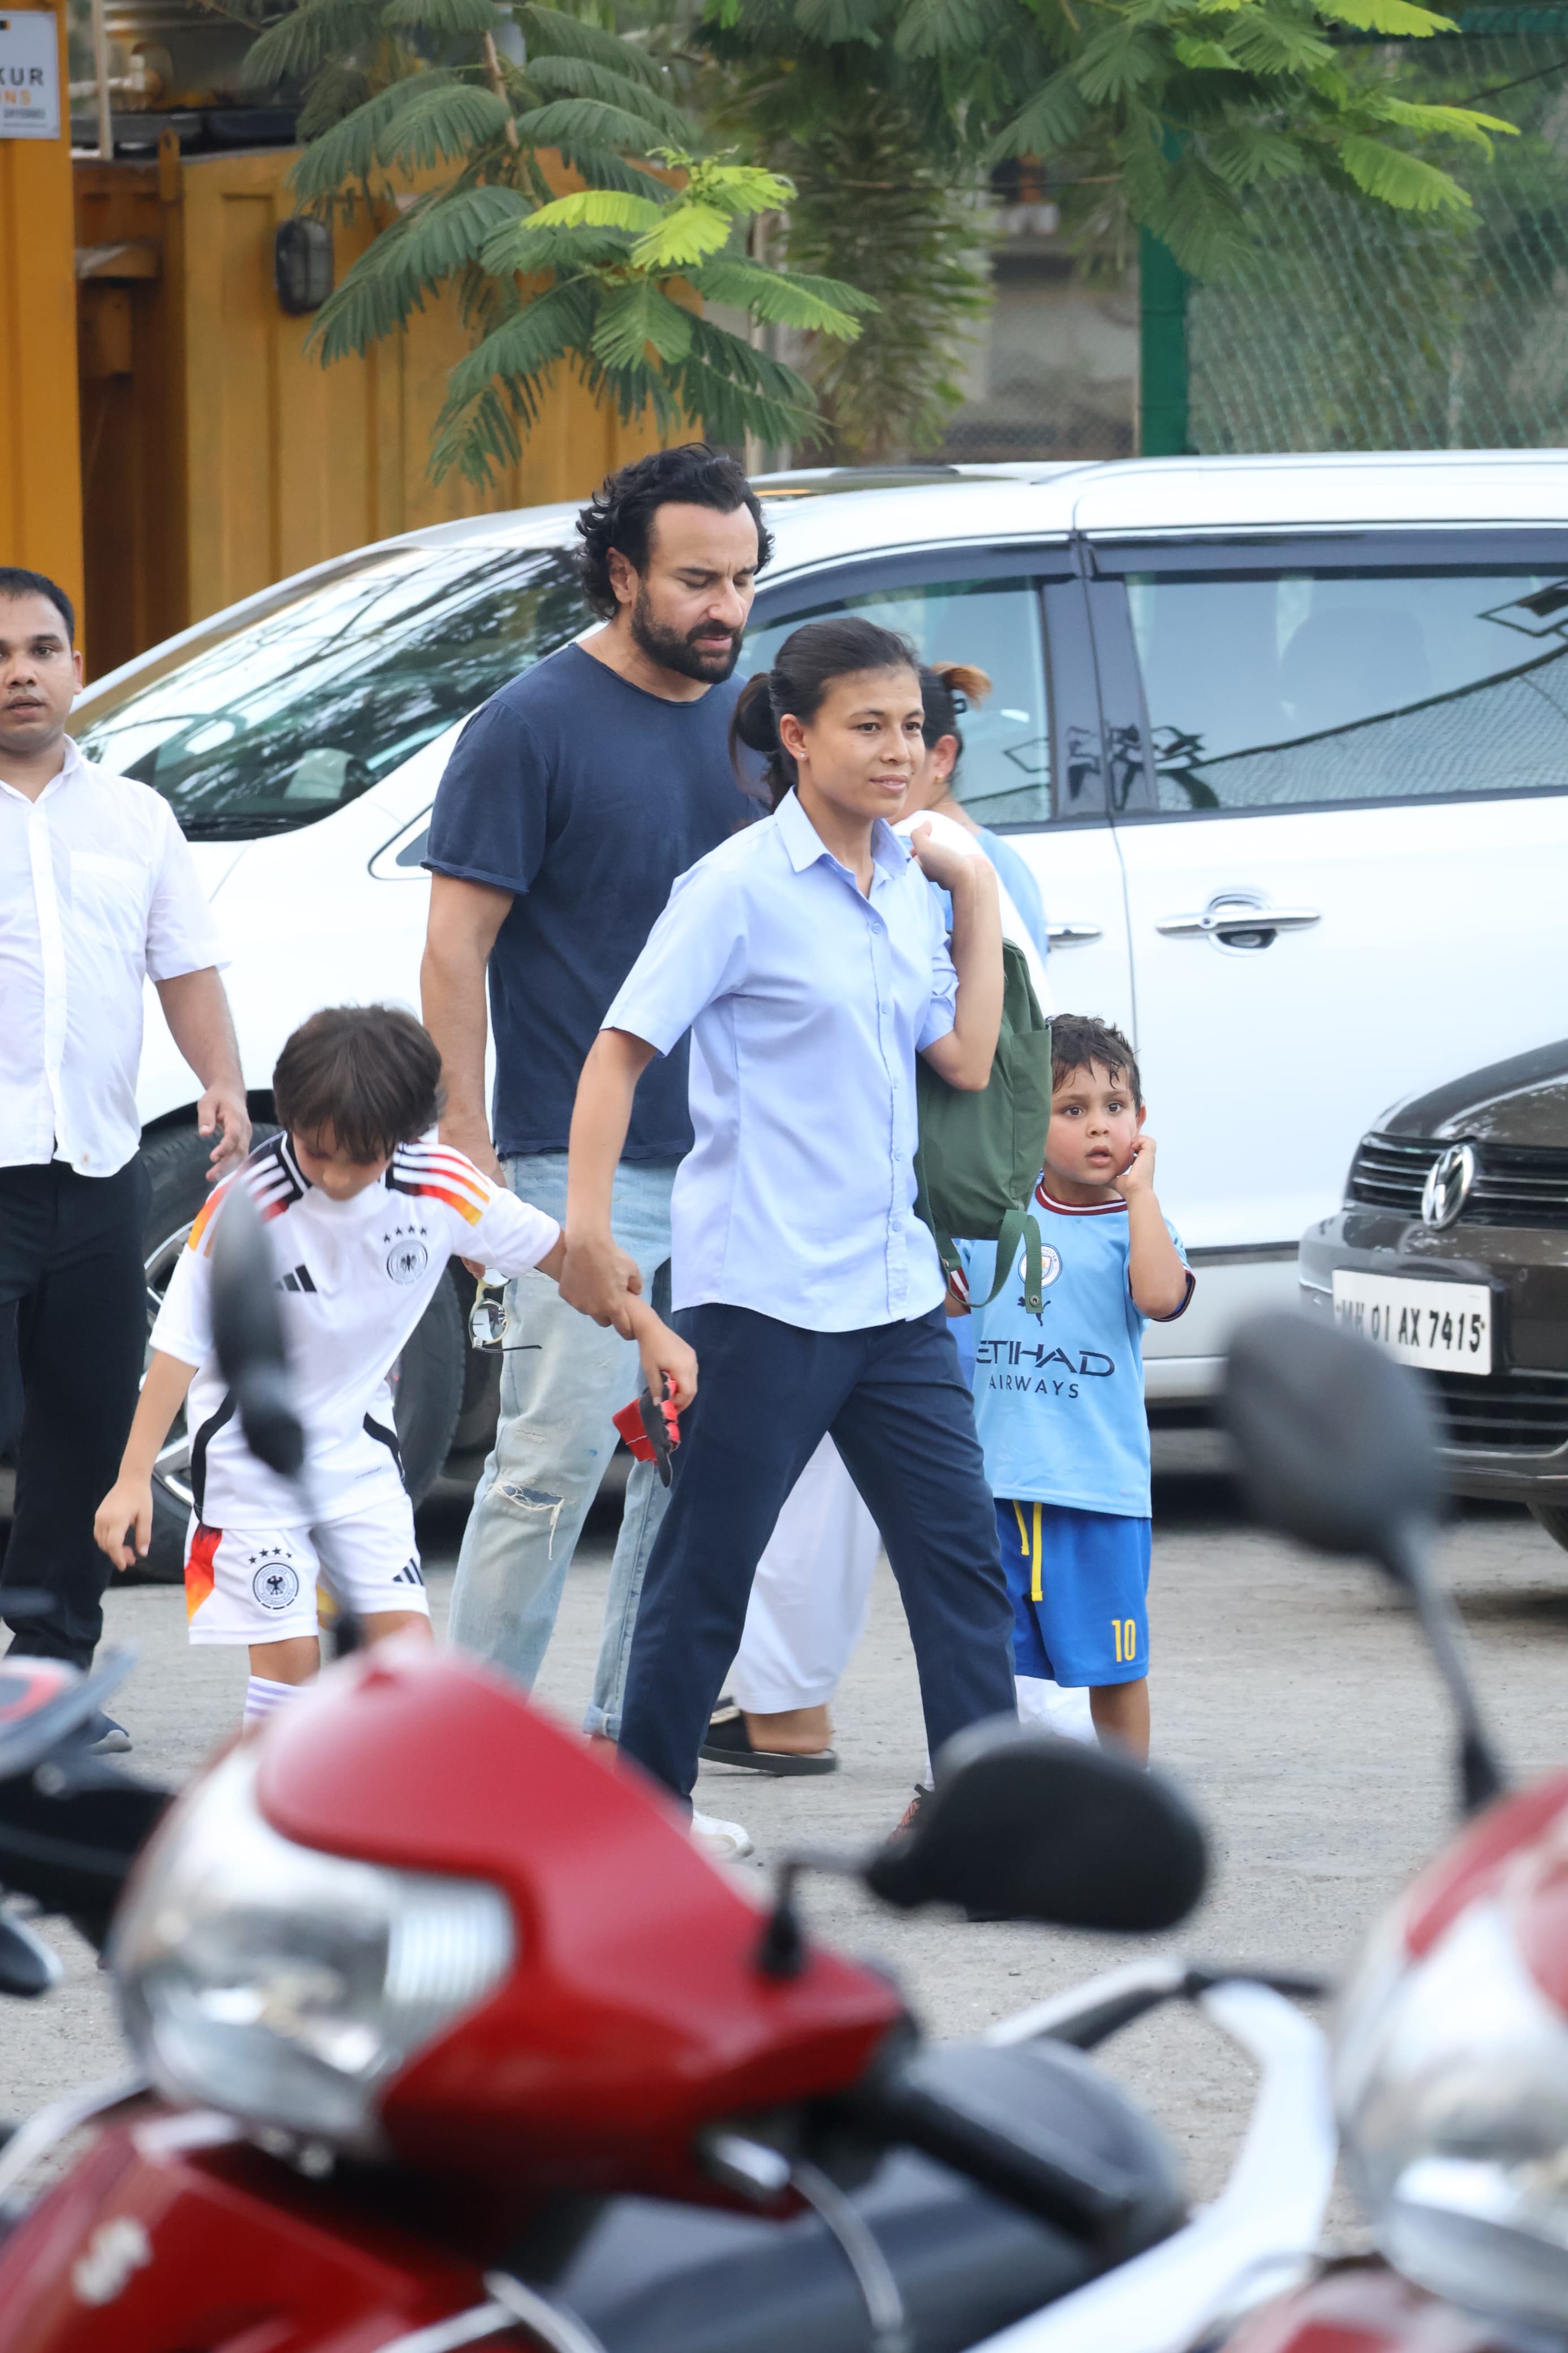 The boys were clicked heading for their football practice